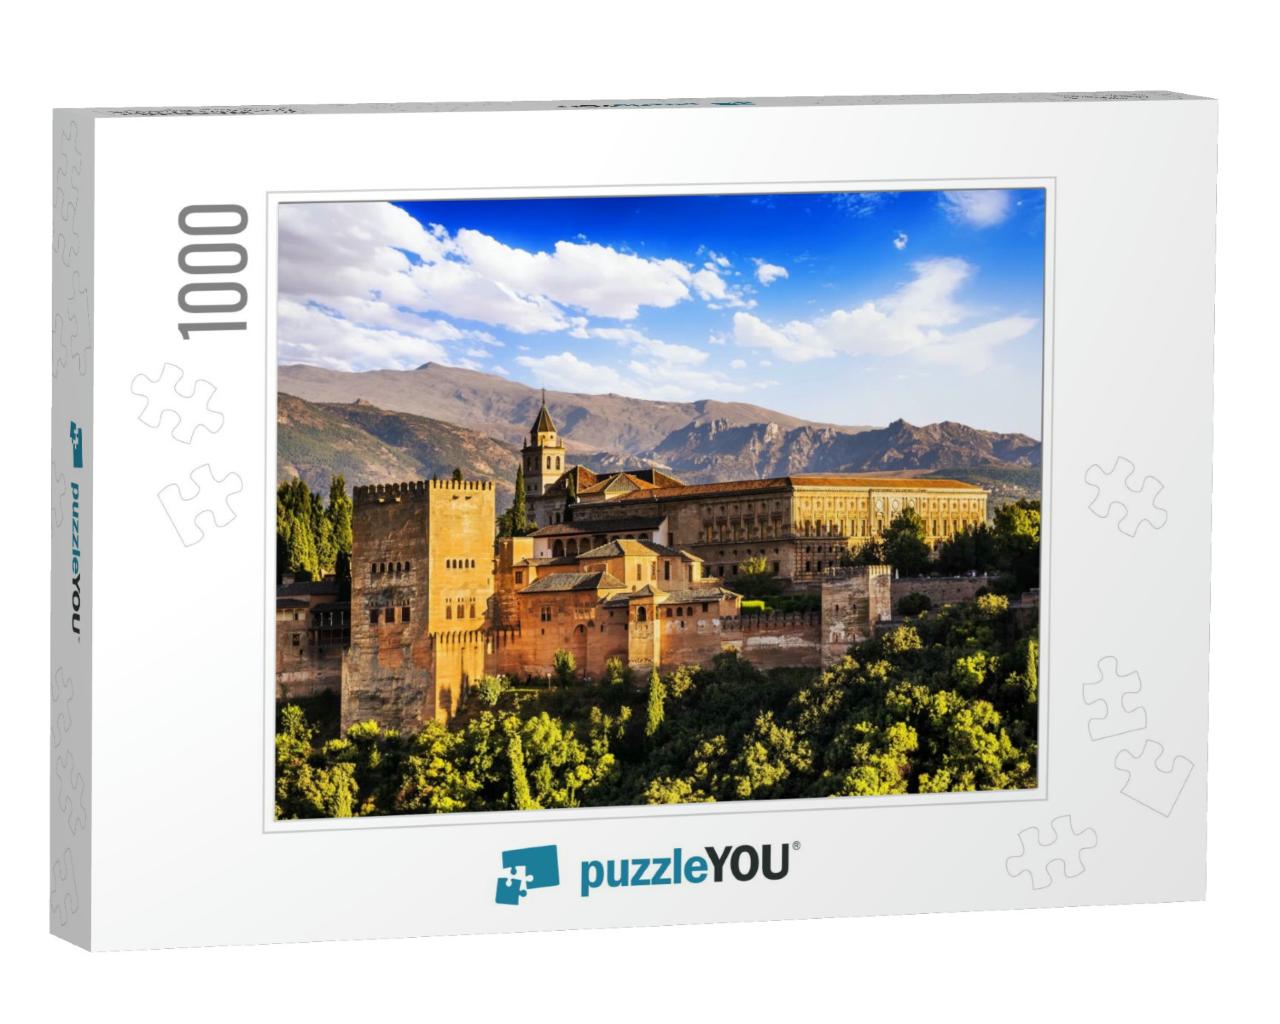 Ancient Arabic Fortress of Alhambra, Granada, Spain... Jigsaw Puzzle with 1000 pieces